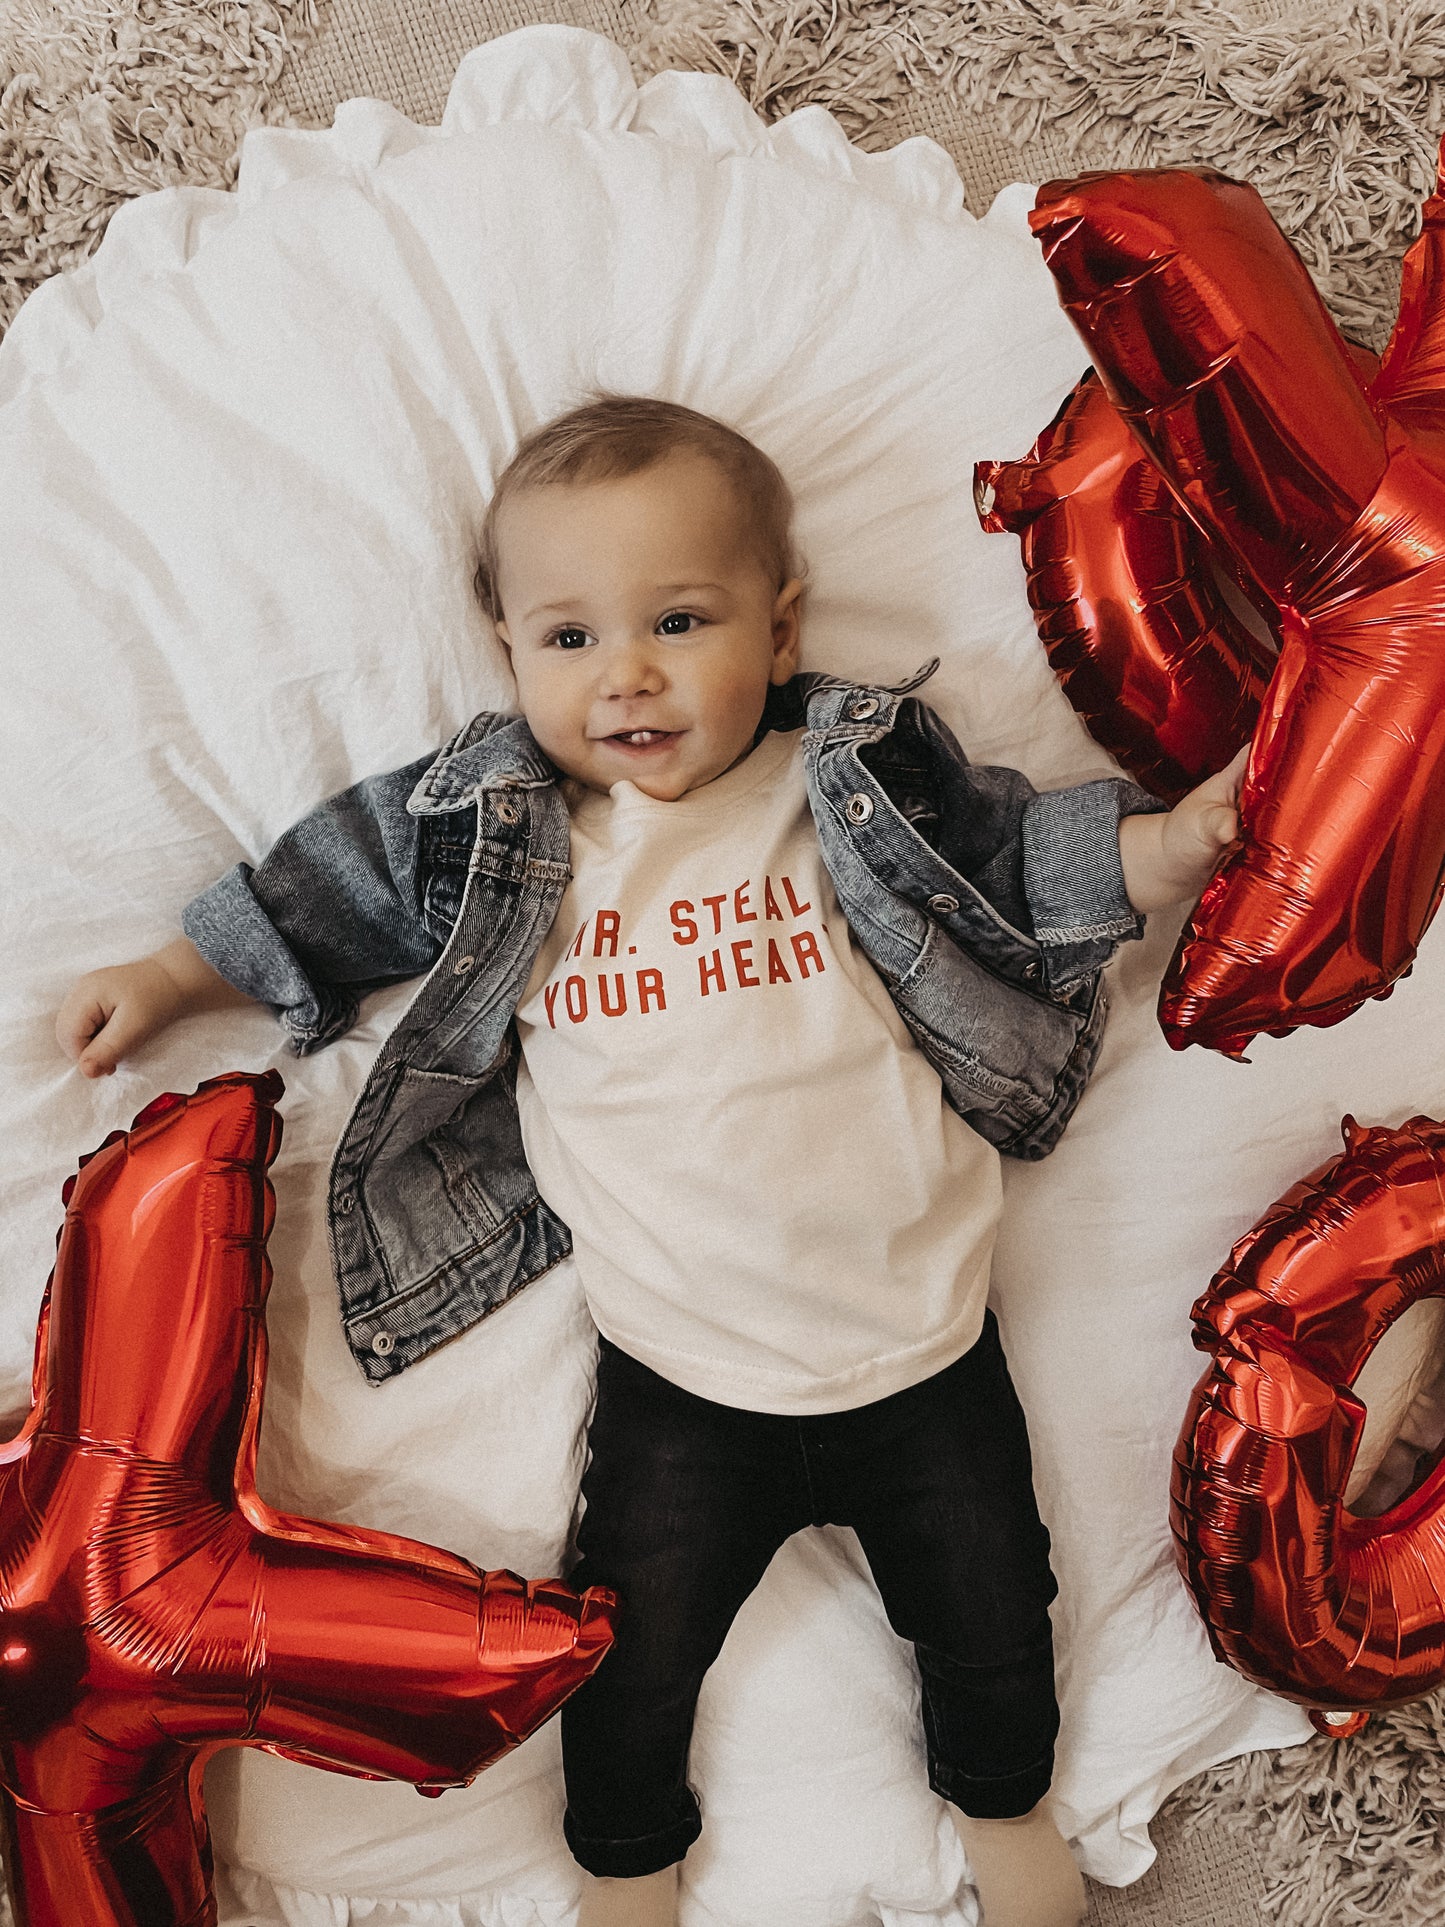 Mr. Steal Your Heart (Red) - Kids Tee (Natural)